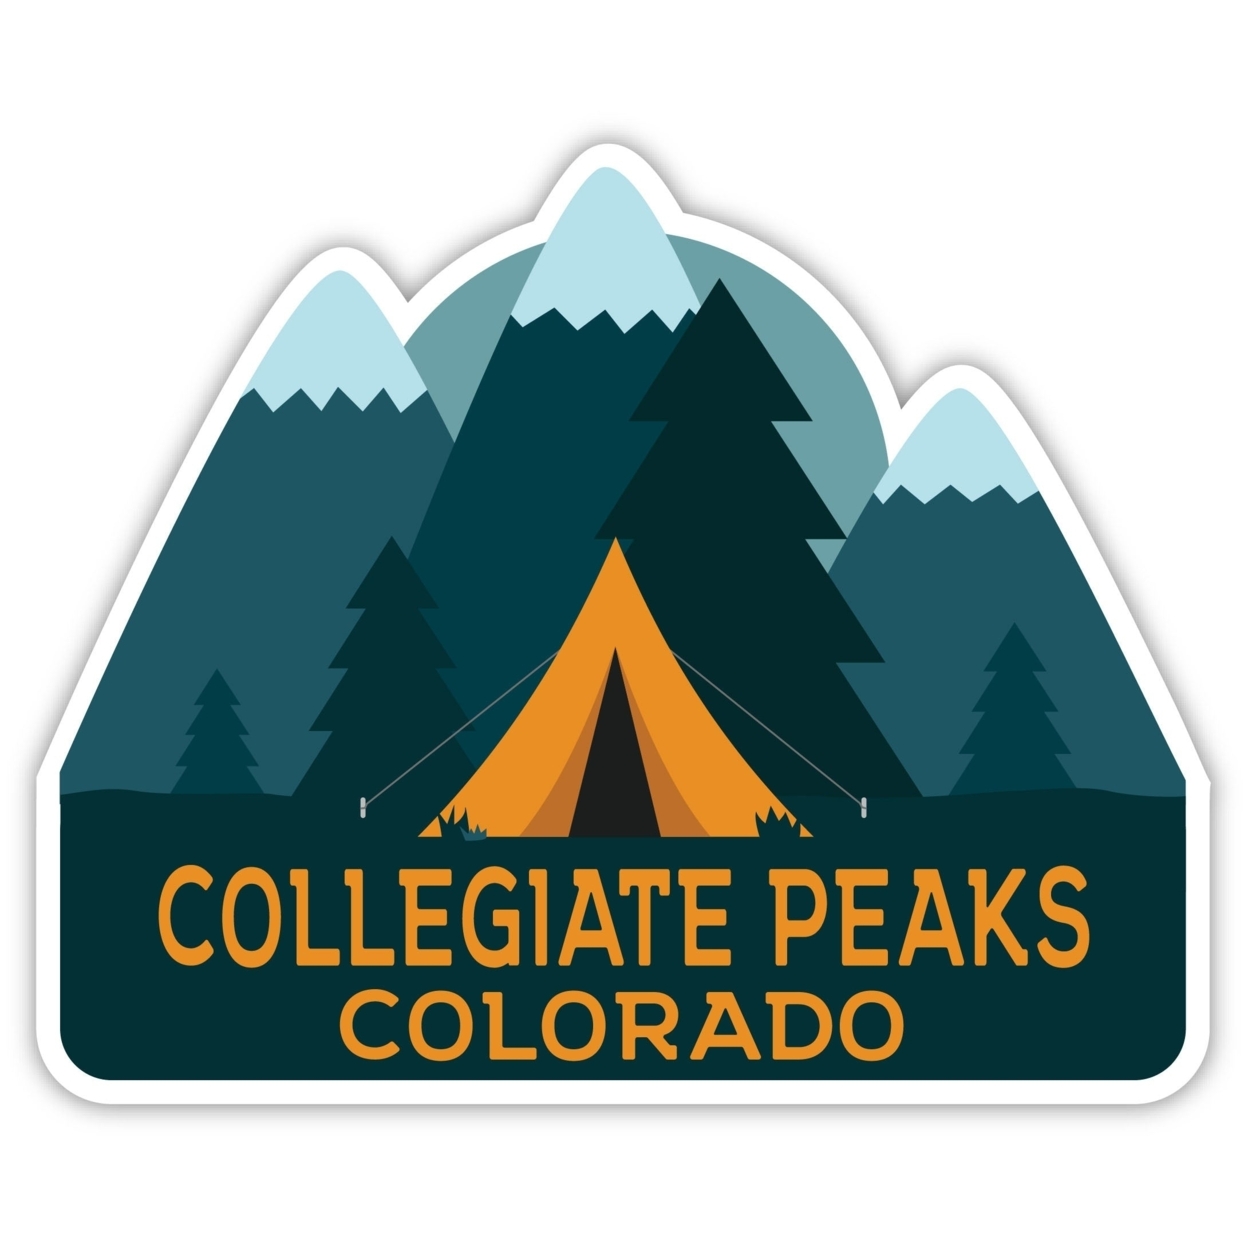 Collegiate Peaks Colorado Souvenir Decorative Stickers (Choose Theme And Size) - 4-Pack, 12-Inch, Great Outdoors